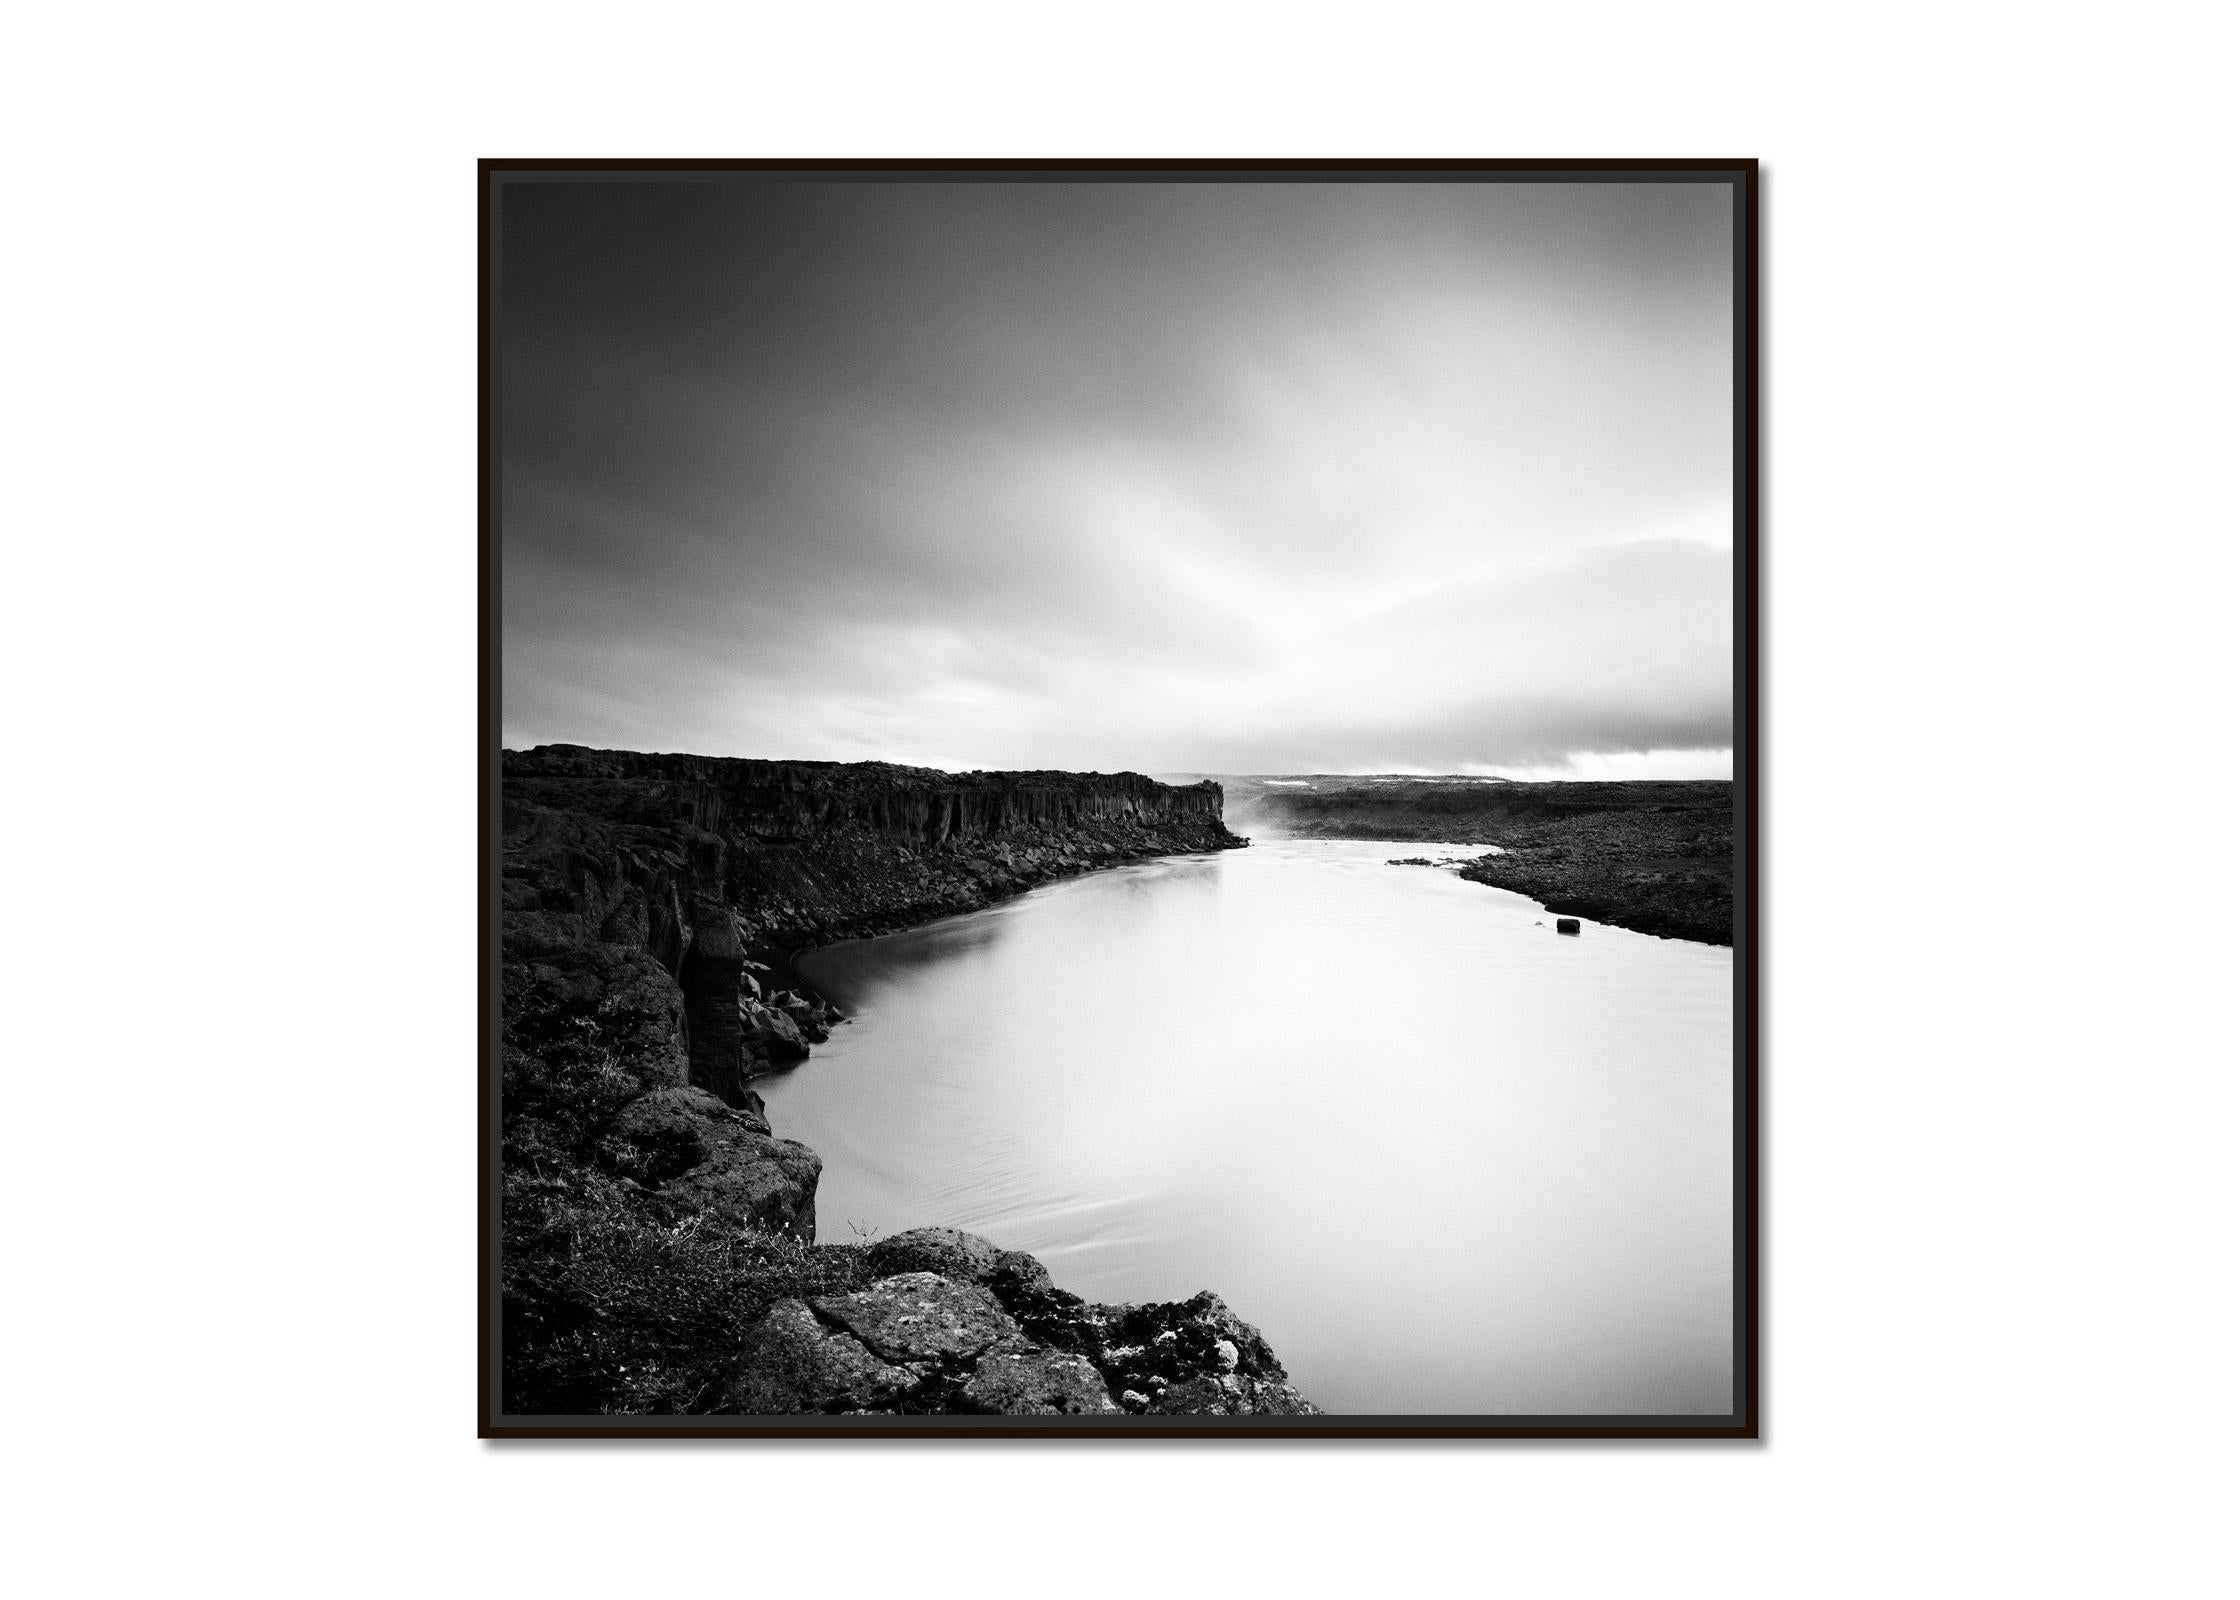 Glacial Stream, Iceland, long exposure, black and white landscape photography - Photograph by Gerald Berghammer